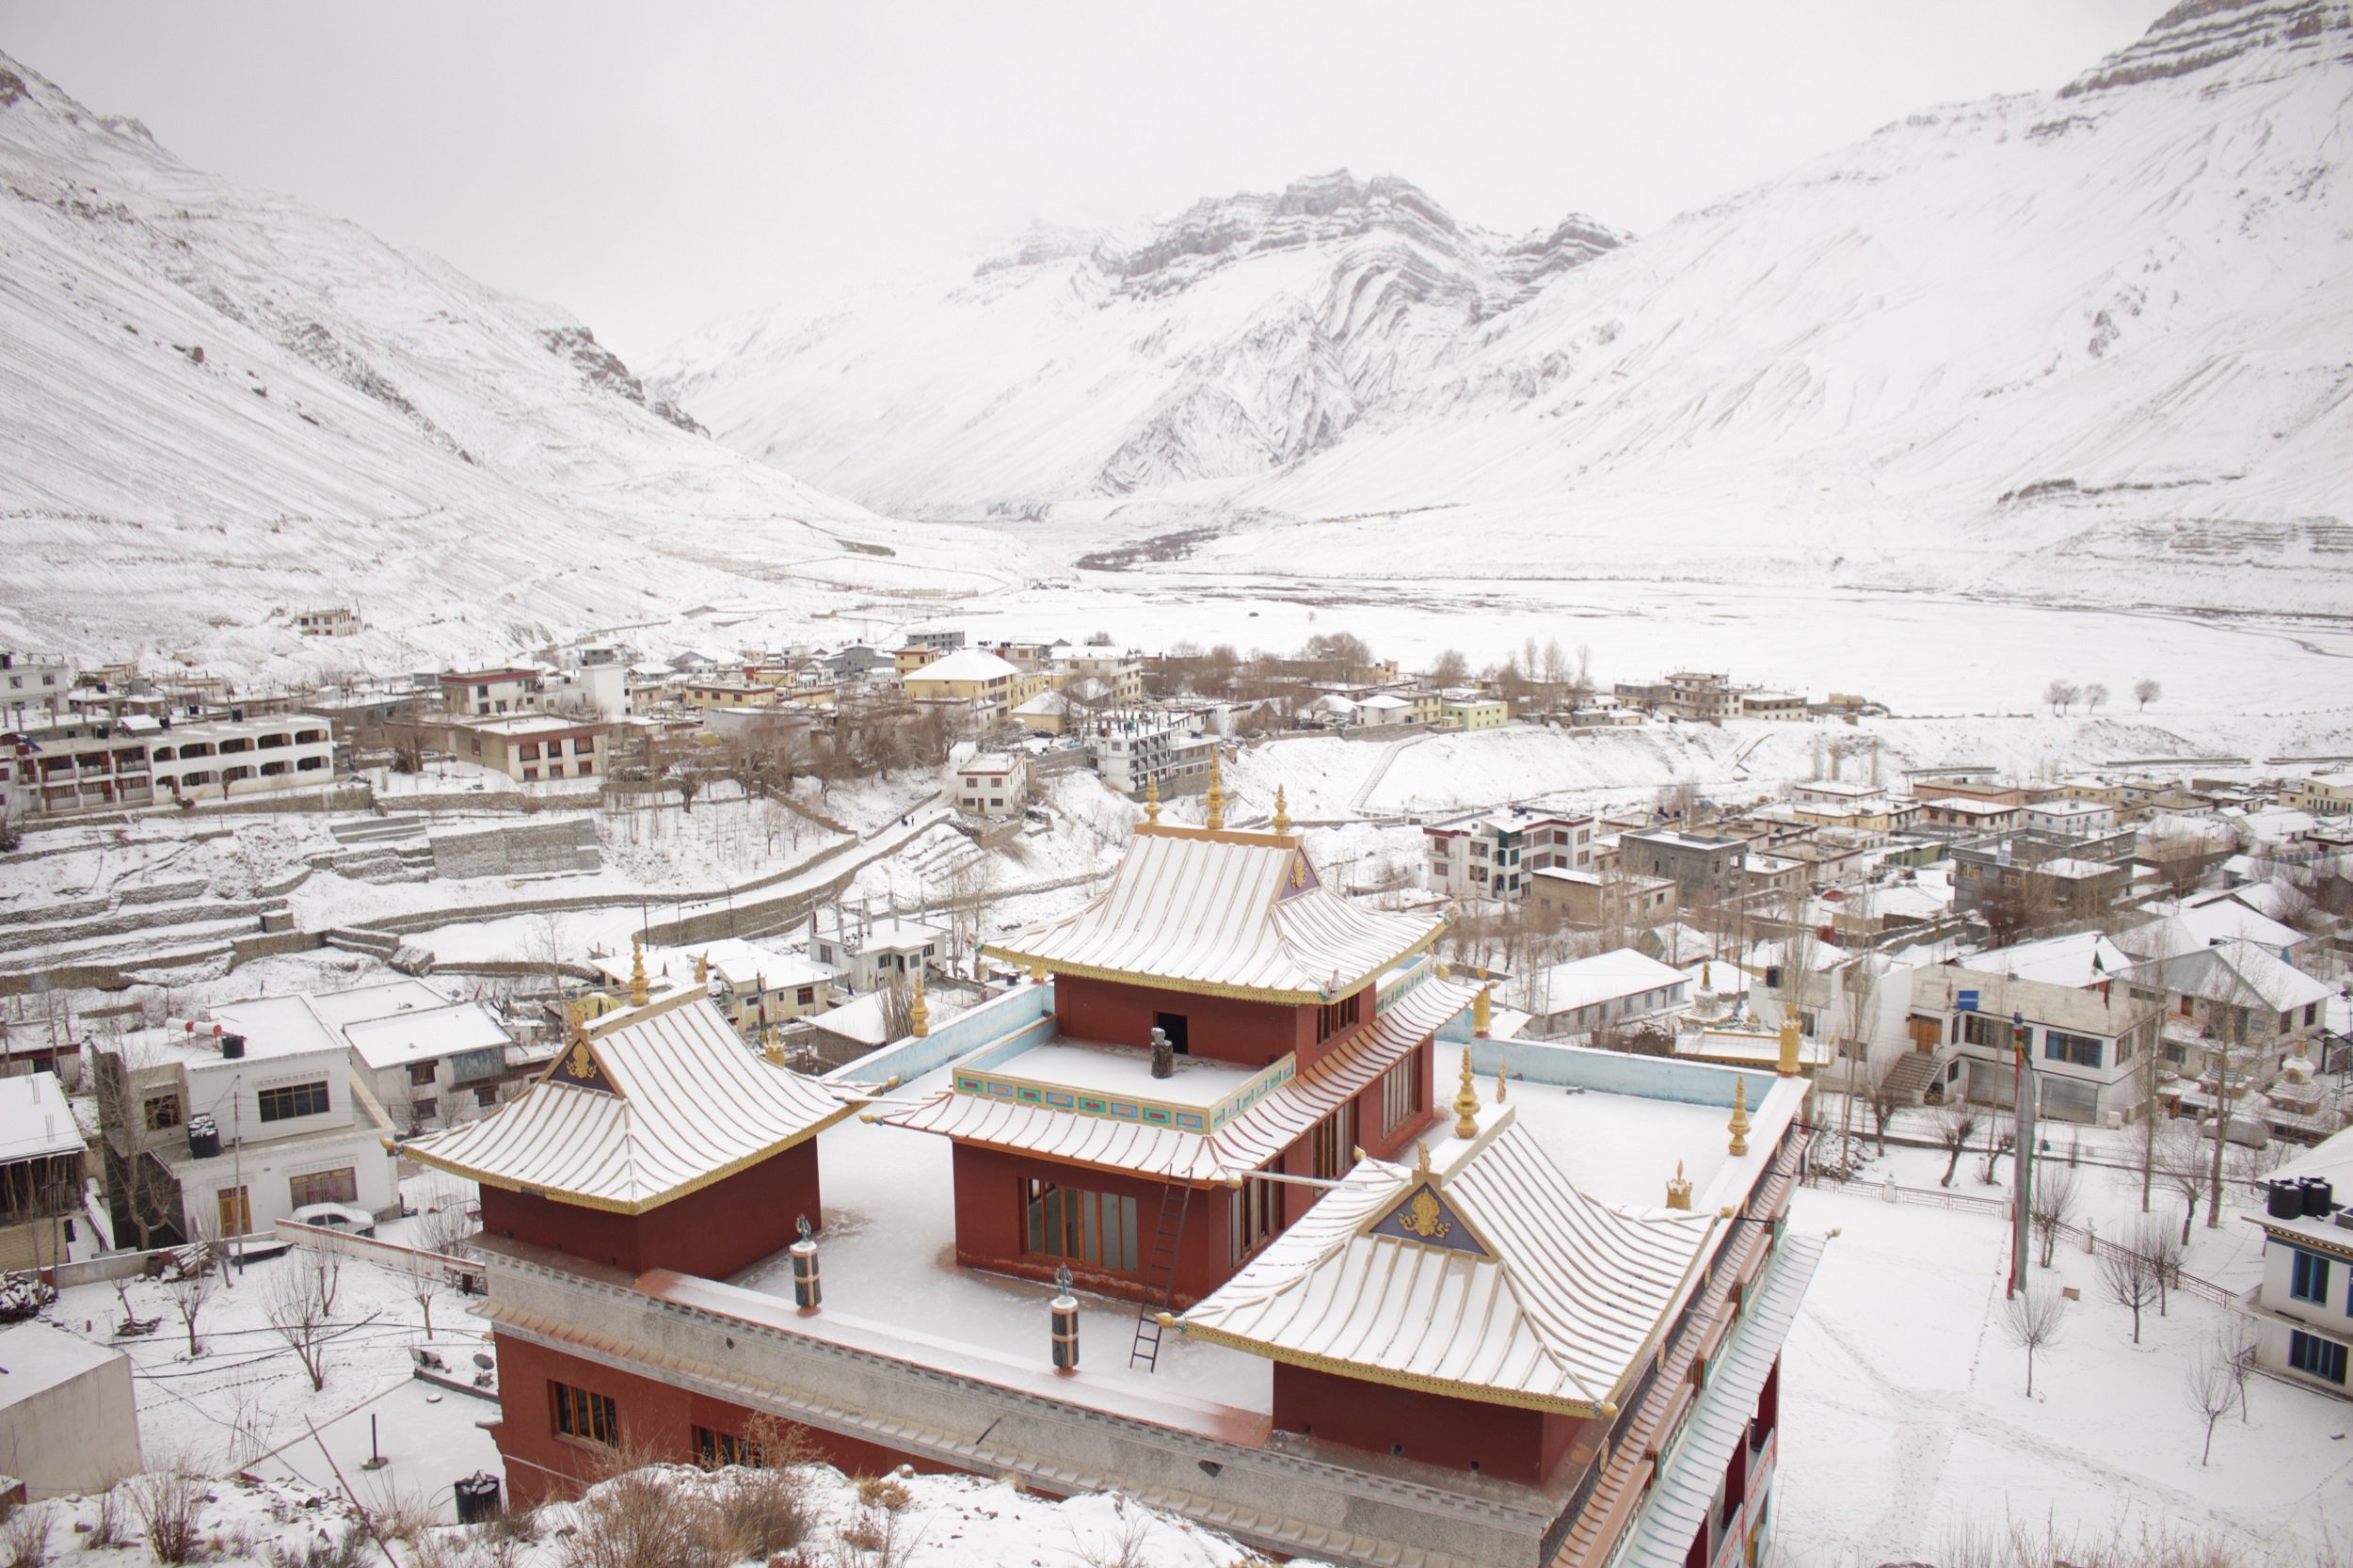 Spiti can be beautiful in the winter, but the conditions are harsh [image by: Nawang Targay]